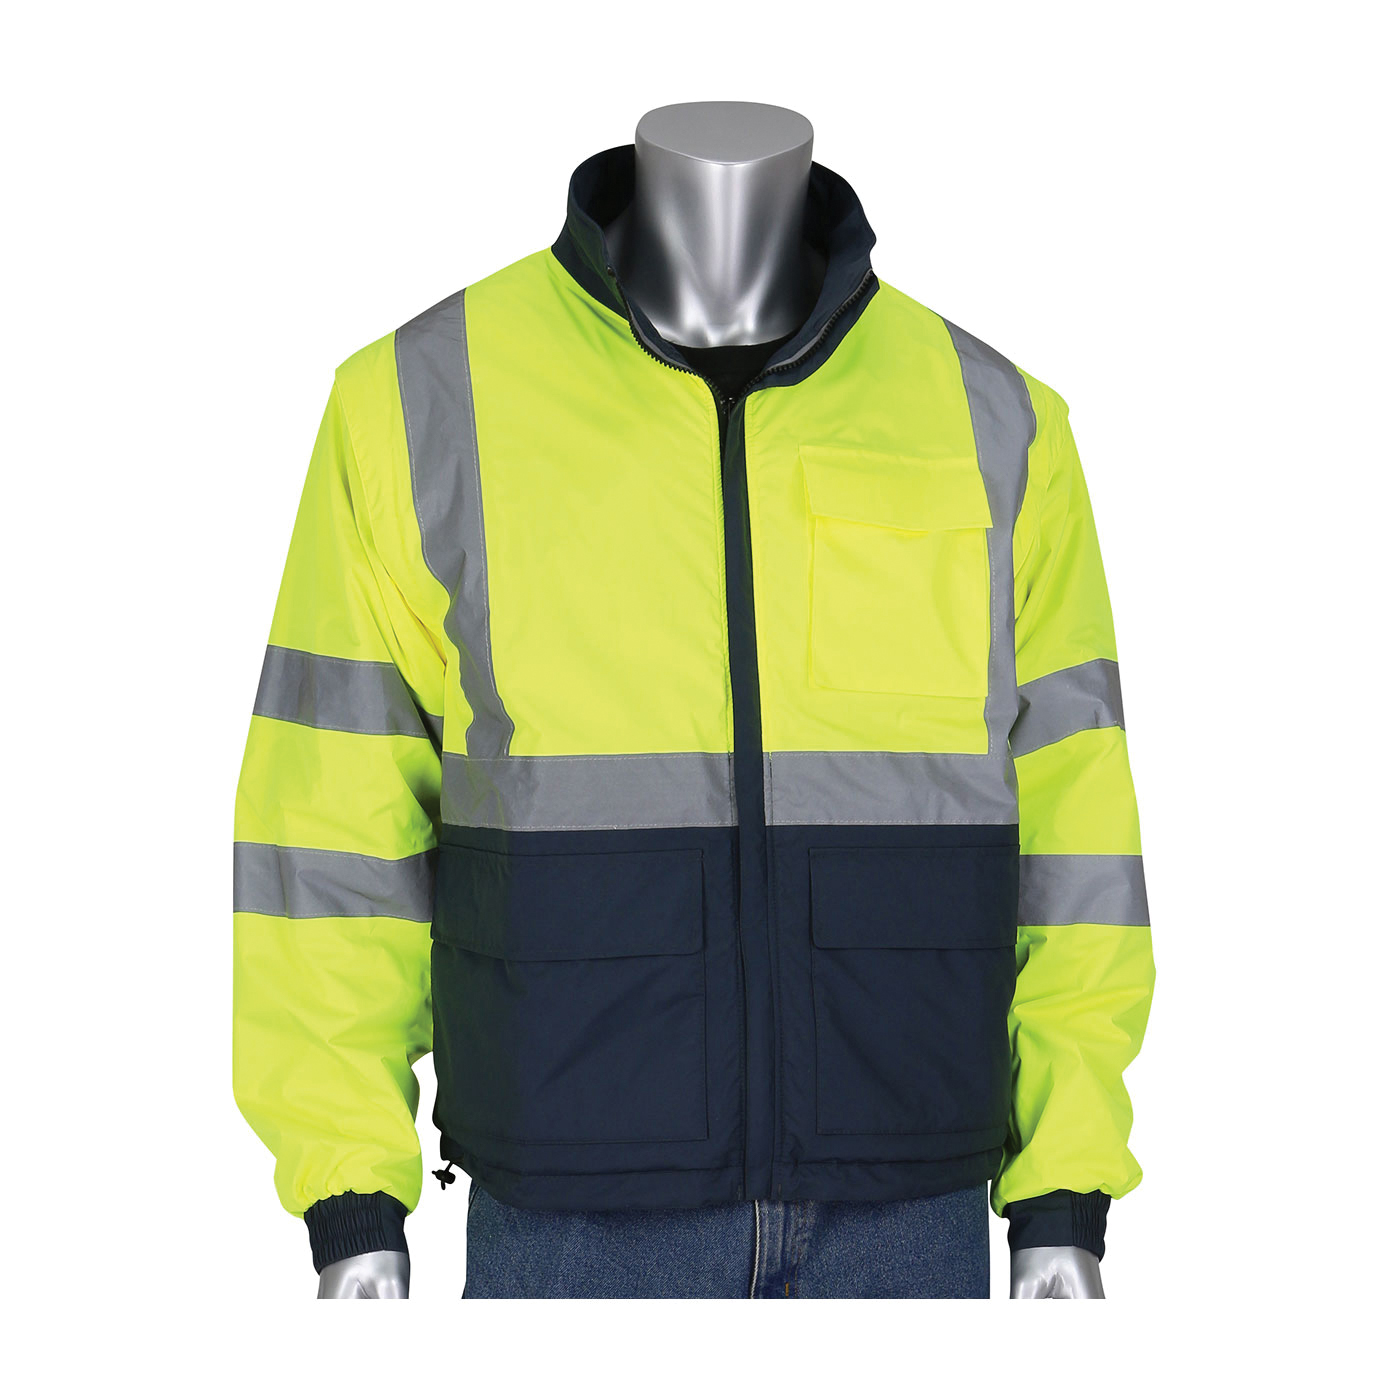 PIP® 333-1500-R/2X 333-1500-R 4-in-1 Multi-Seasonal Lightweight Reversible Windbreaker Jacket With Detachable Sleeves, Dark Gray/Hi-Viz Lime Yellow, Polyester, 55.9 in Chest, Resists: Water, ANSI 107 Type R Class 3